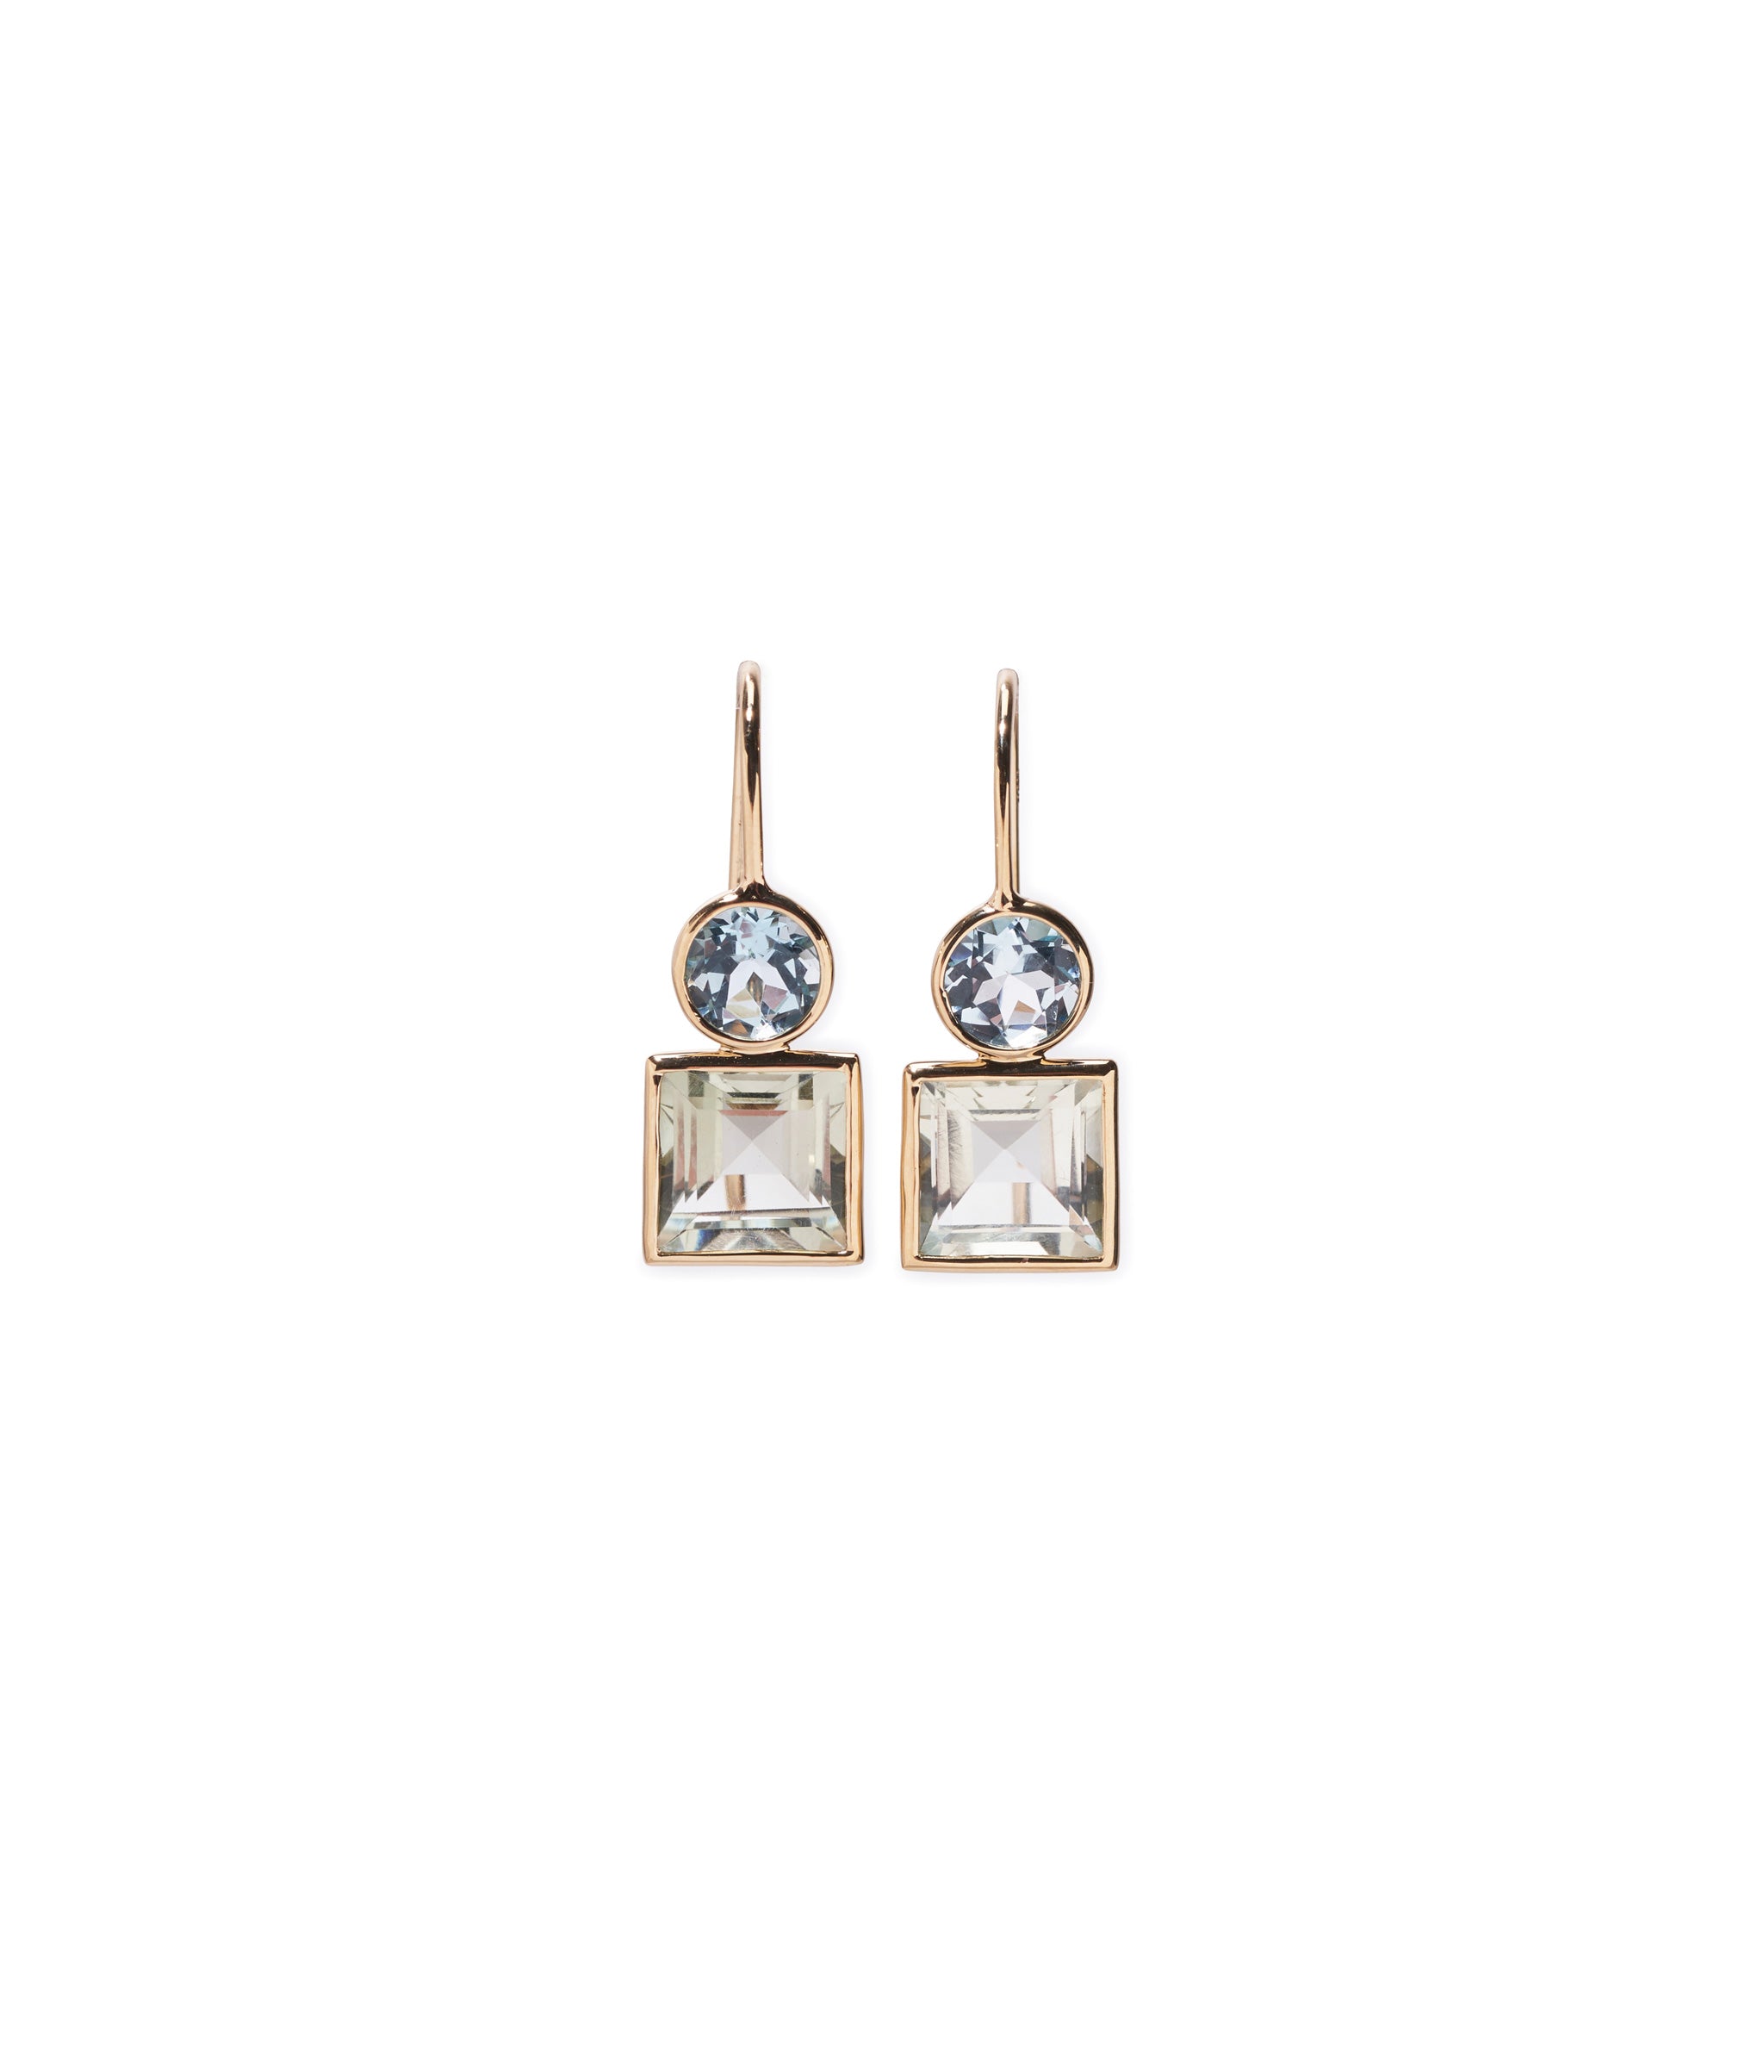 14k Pastille Earrings in Sky Blue Topaz & Green Amethyst. Fine gold earwires with faceted round blue and square green stones.